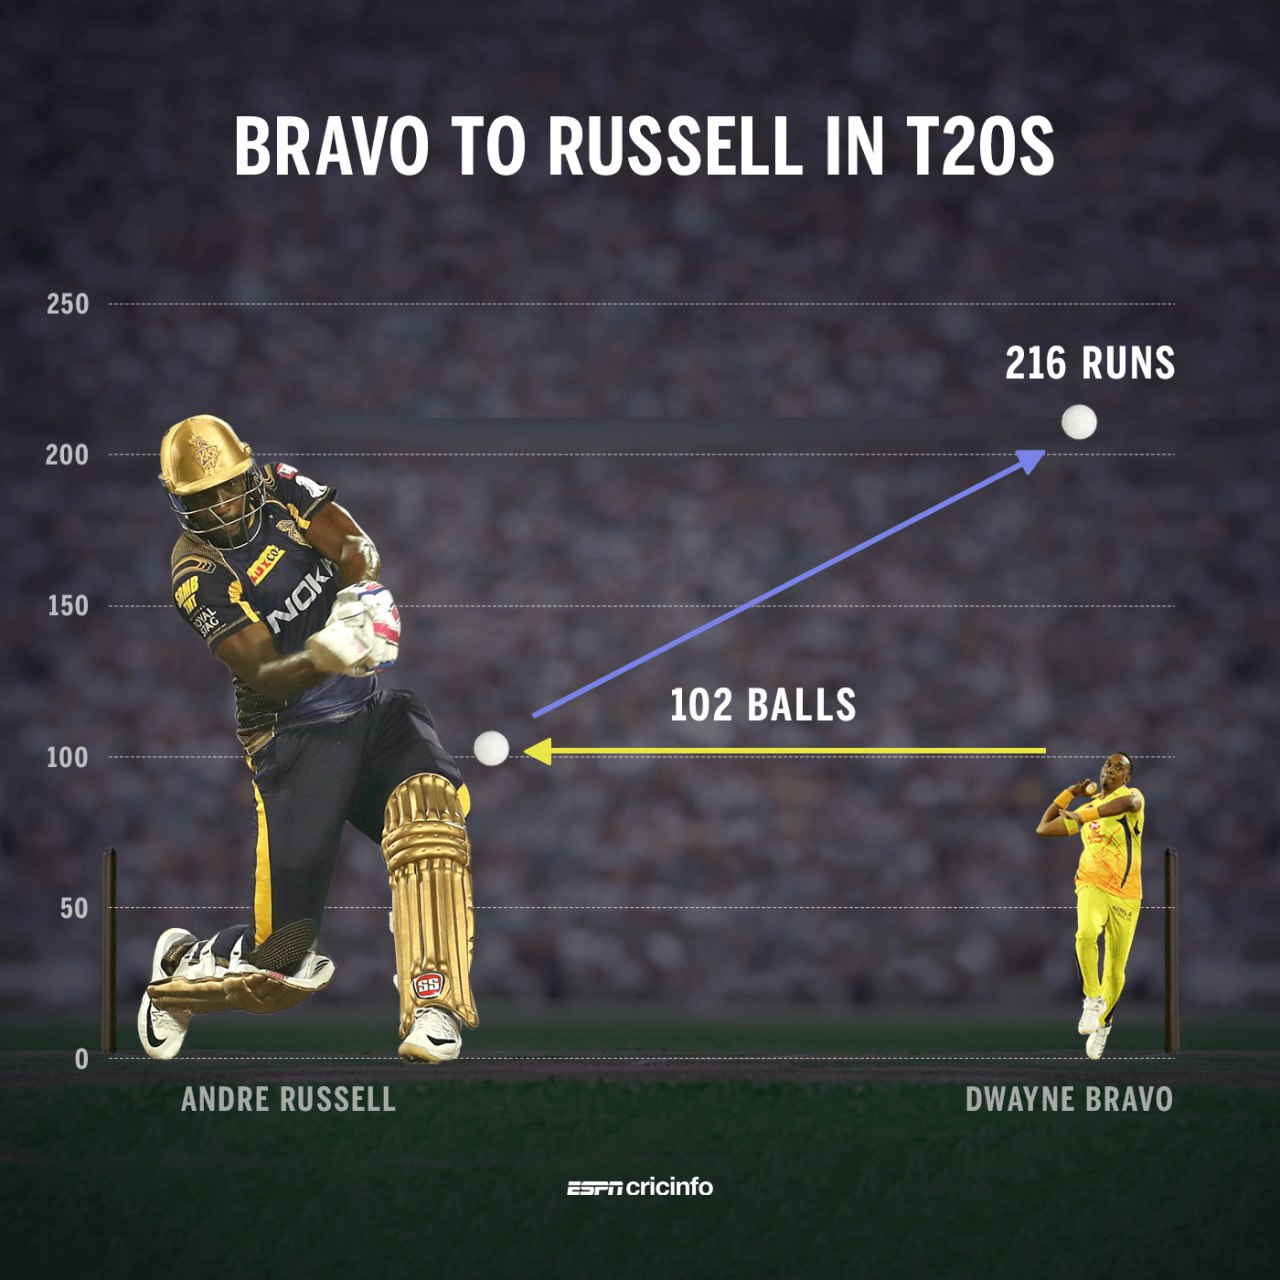 In T20s, Andre Russell has faced 102 balls from Dwayne Bravo and gone at a strike rate of 211.8